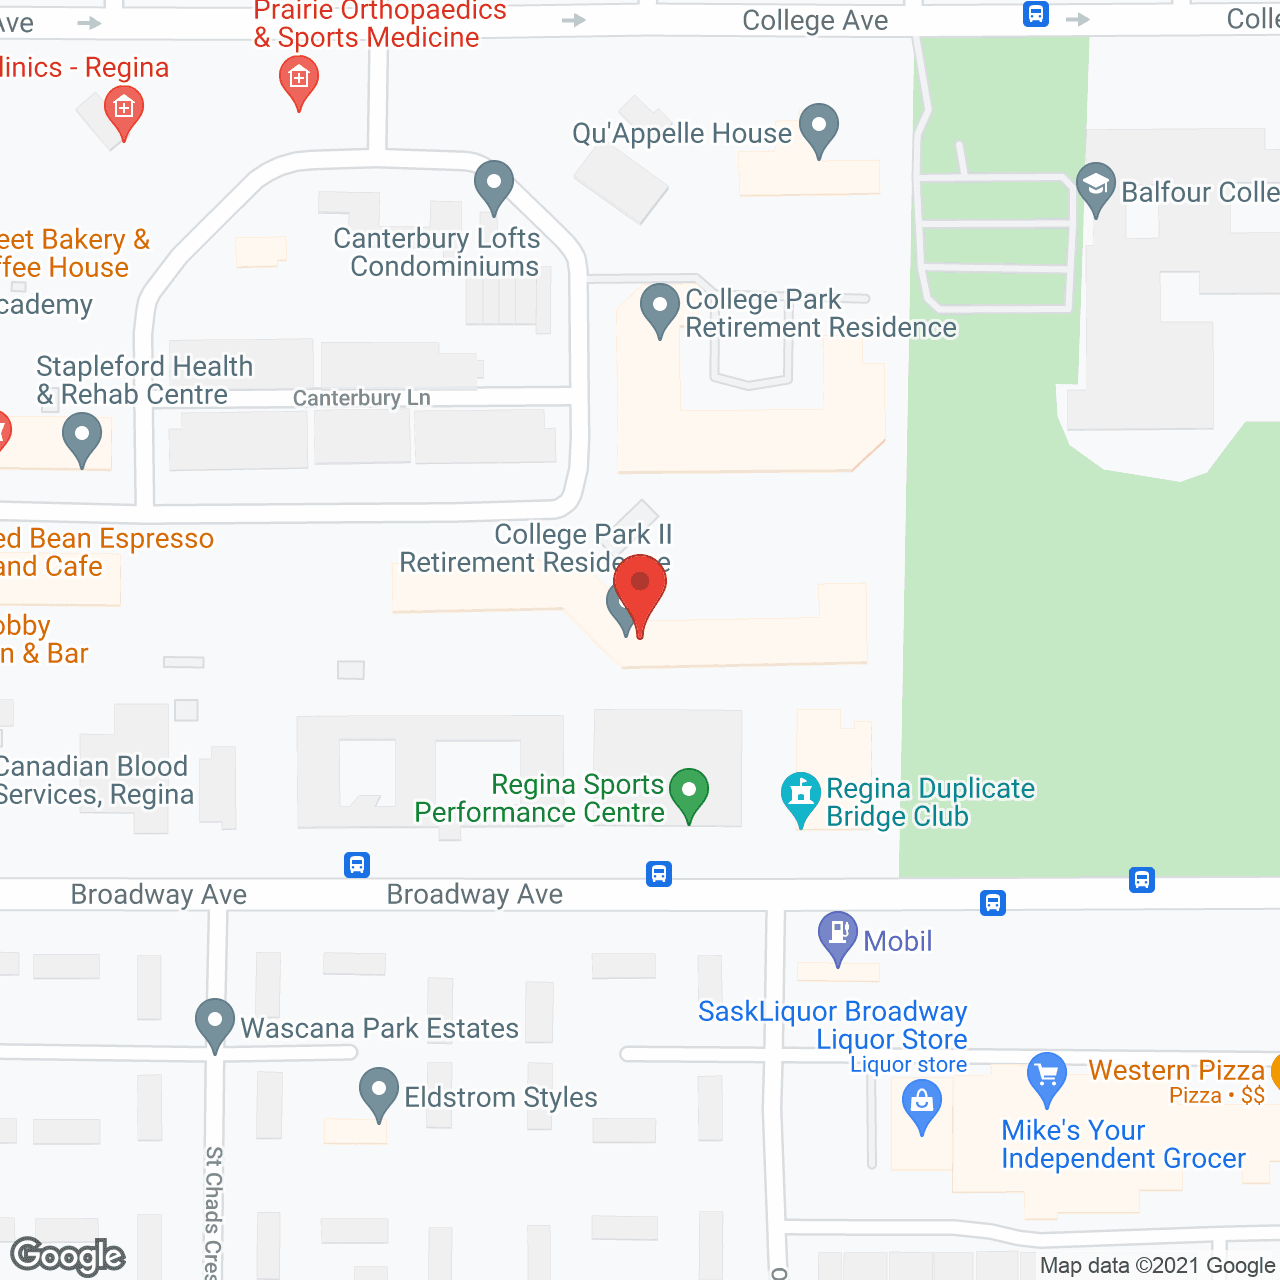 College Park ll Retirement Residence in google map